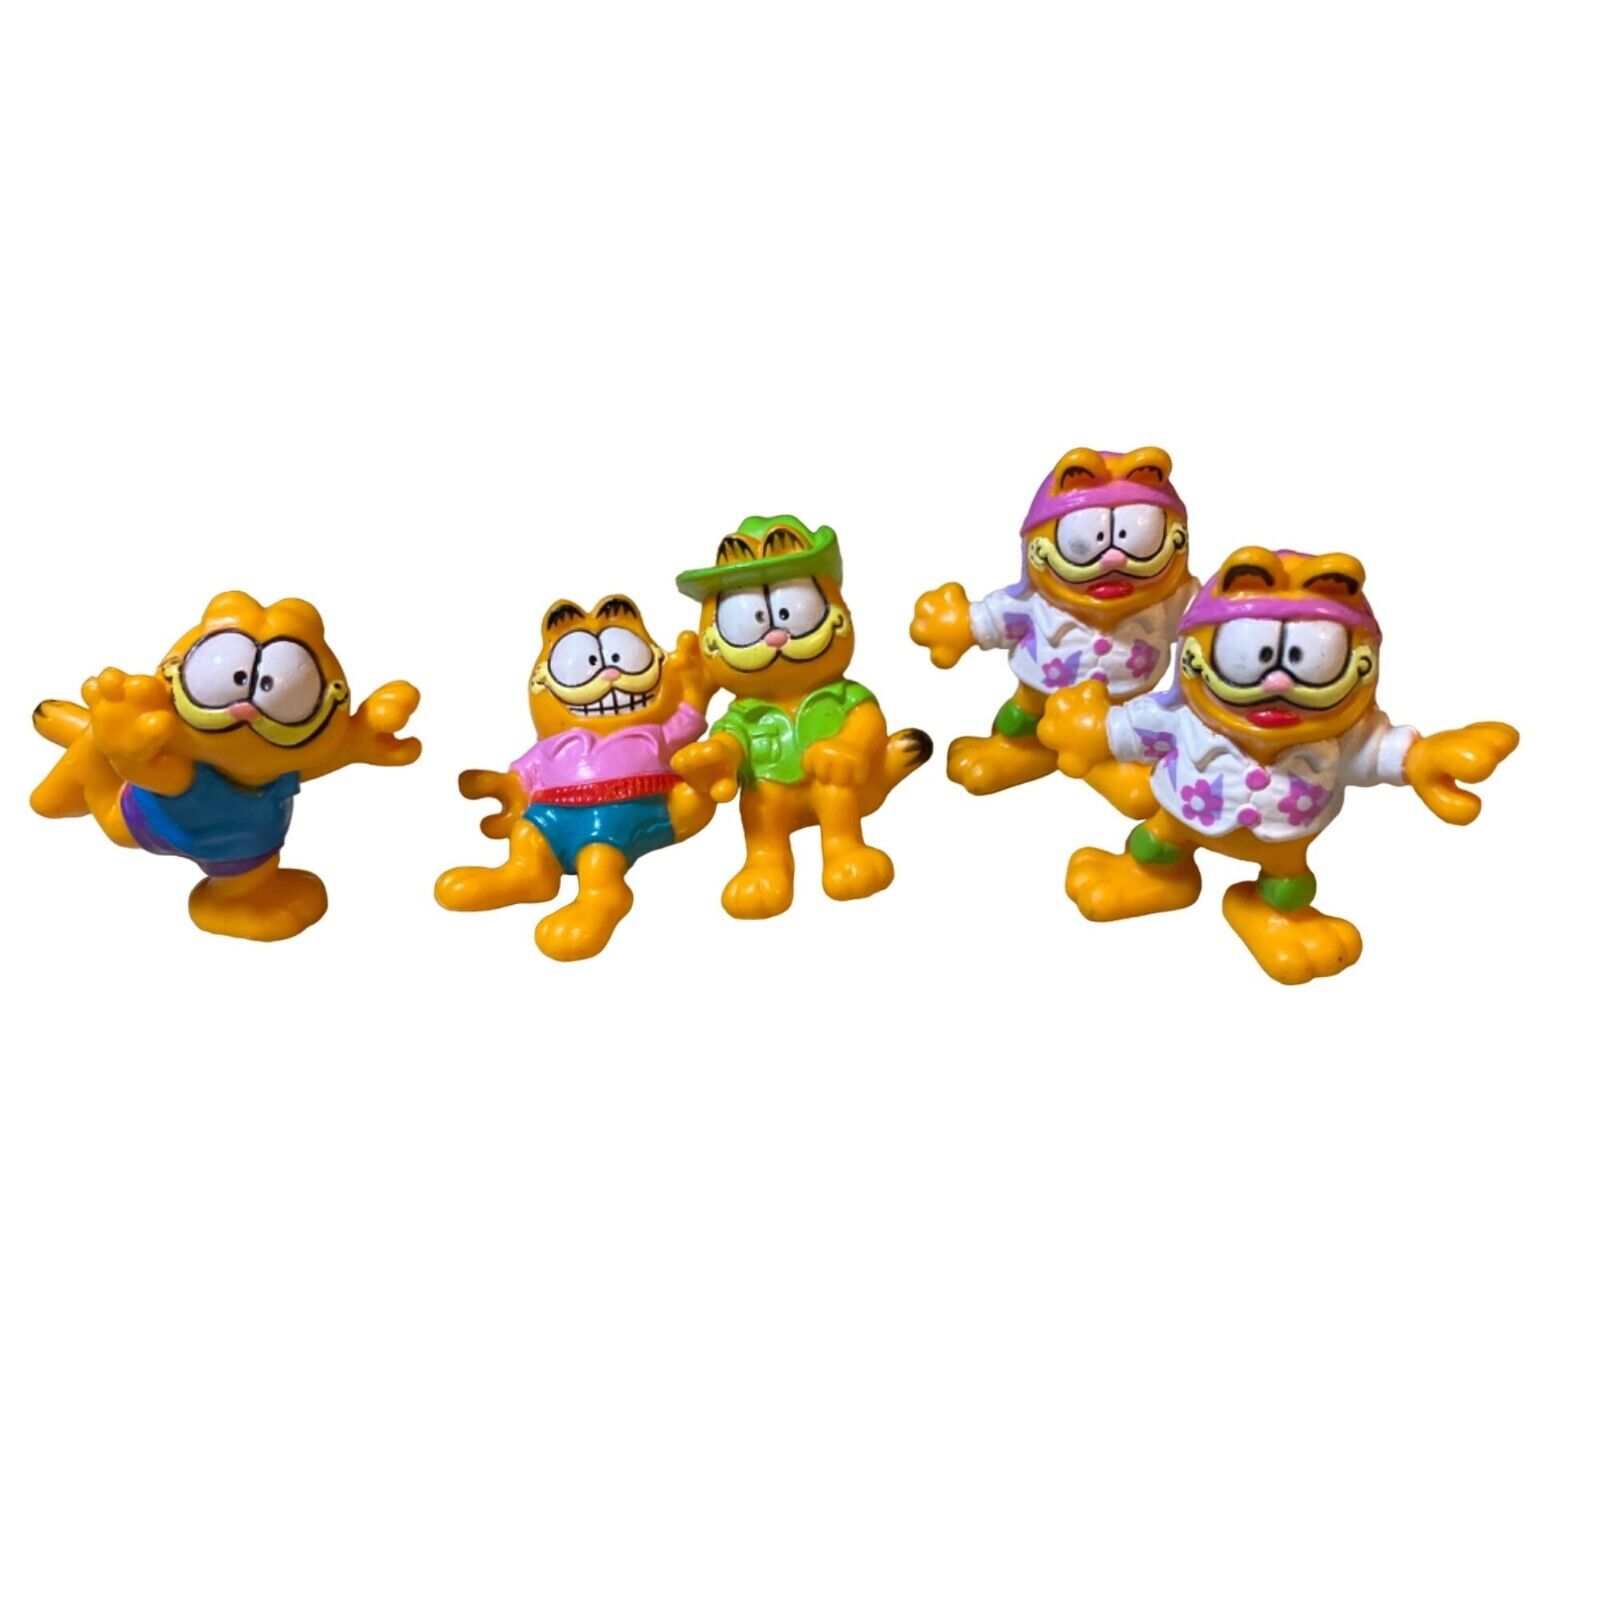 United Feat Synd Lot of 5 Garfield Figures